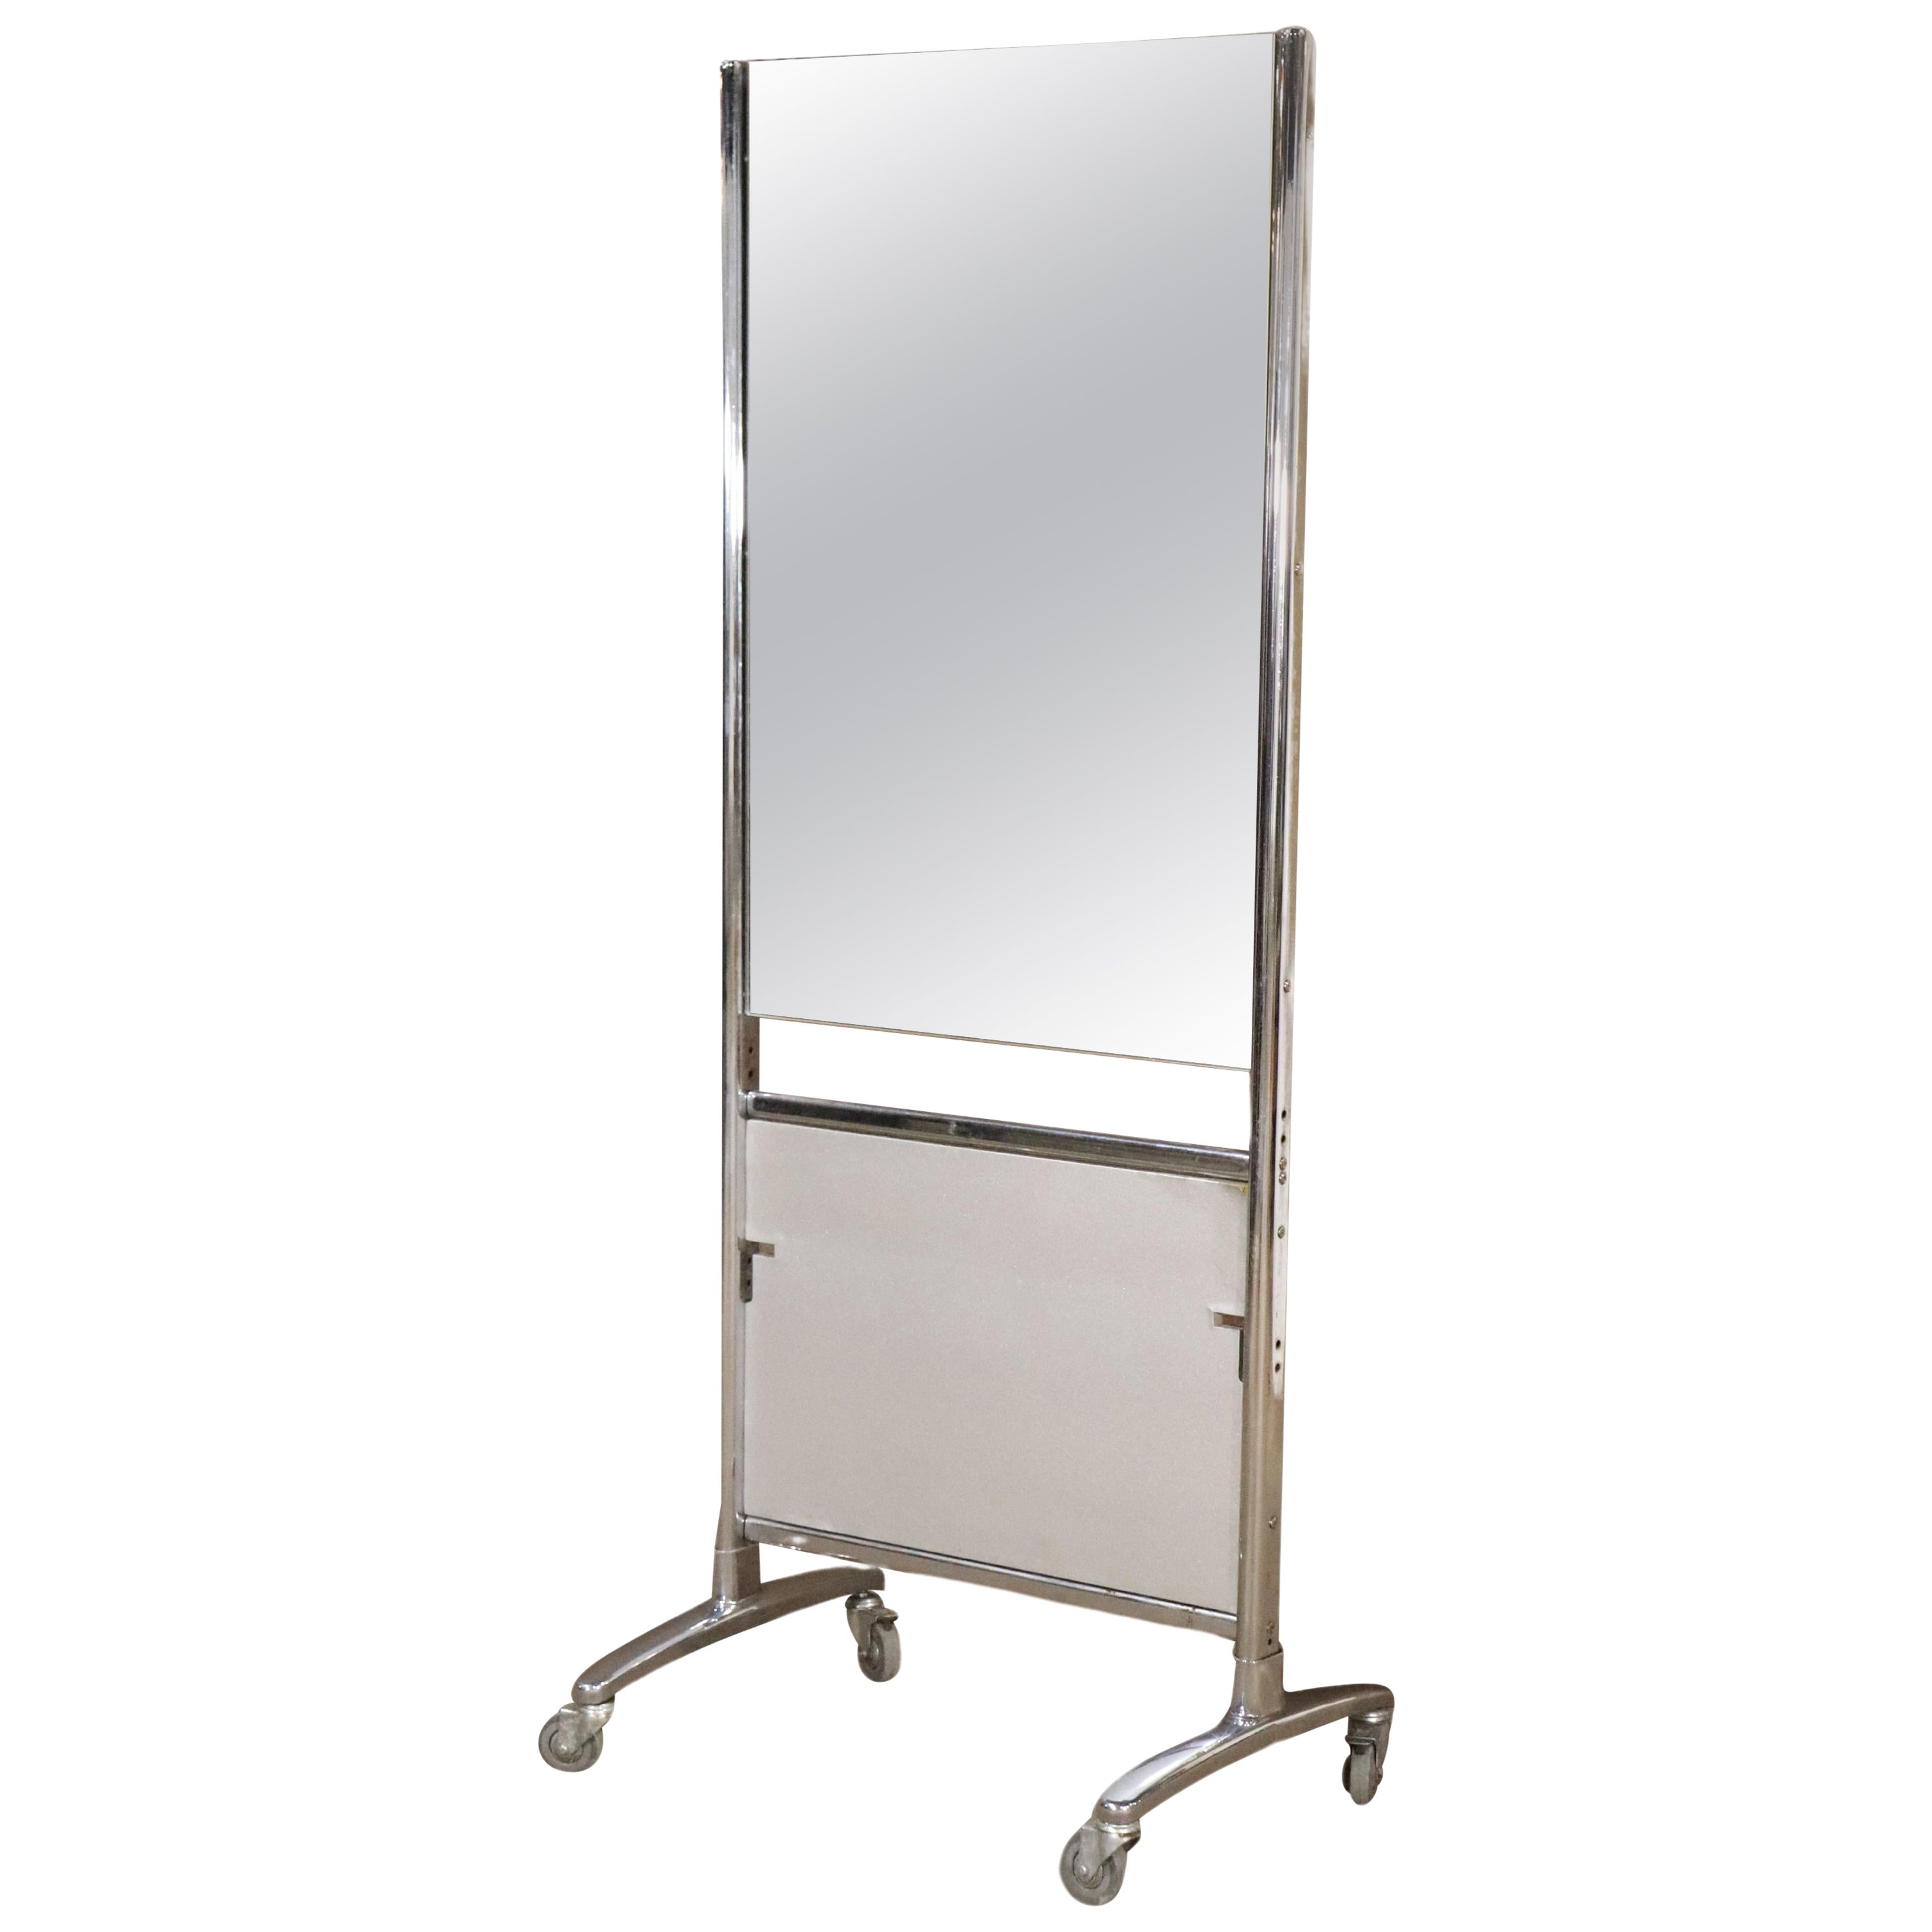 Double Sided Store Mirror For Sale